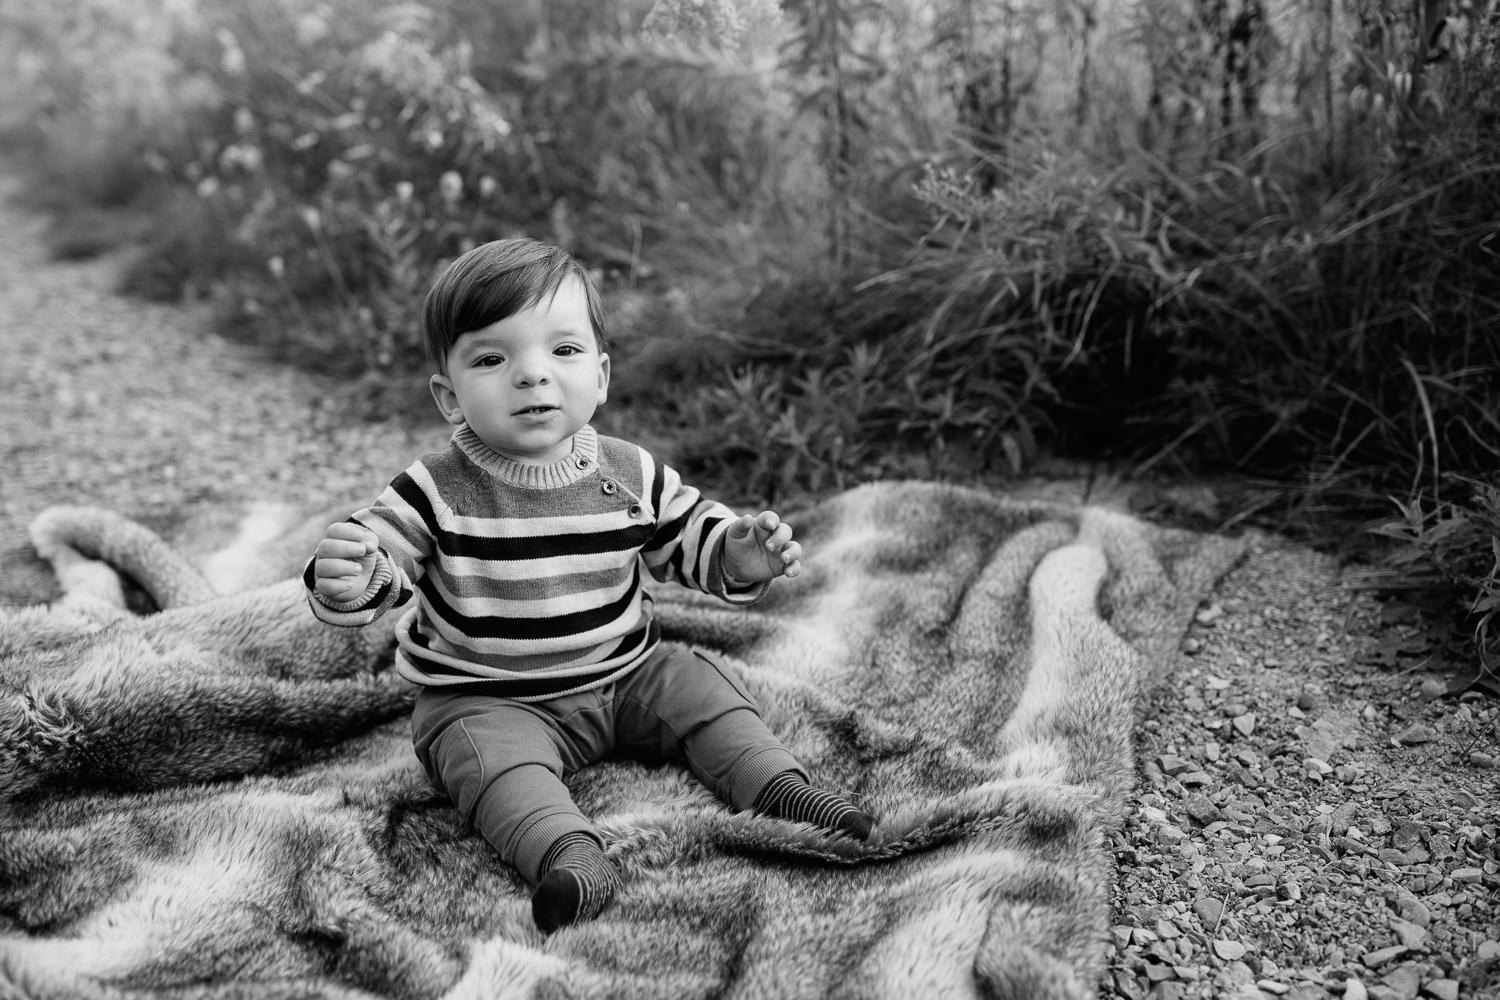 1 year old boy with dark hair and eyes wearing striped sweater sitting on blanket in outdoor path looking at camera - York Region Golden Hour Photography